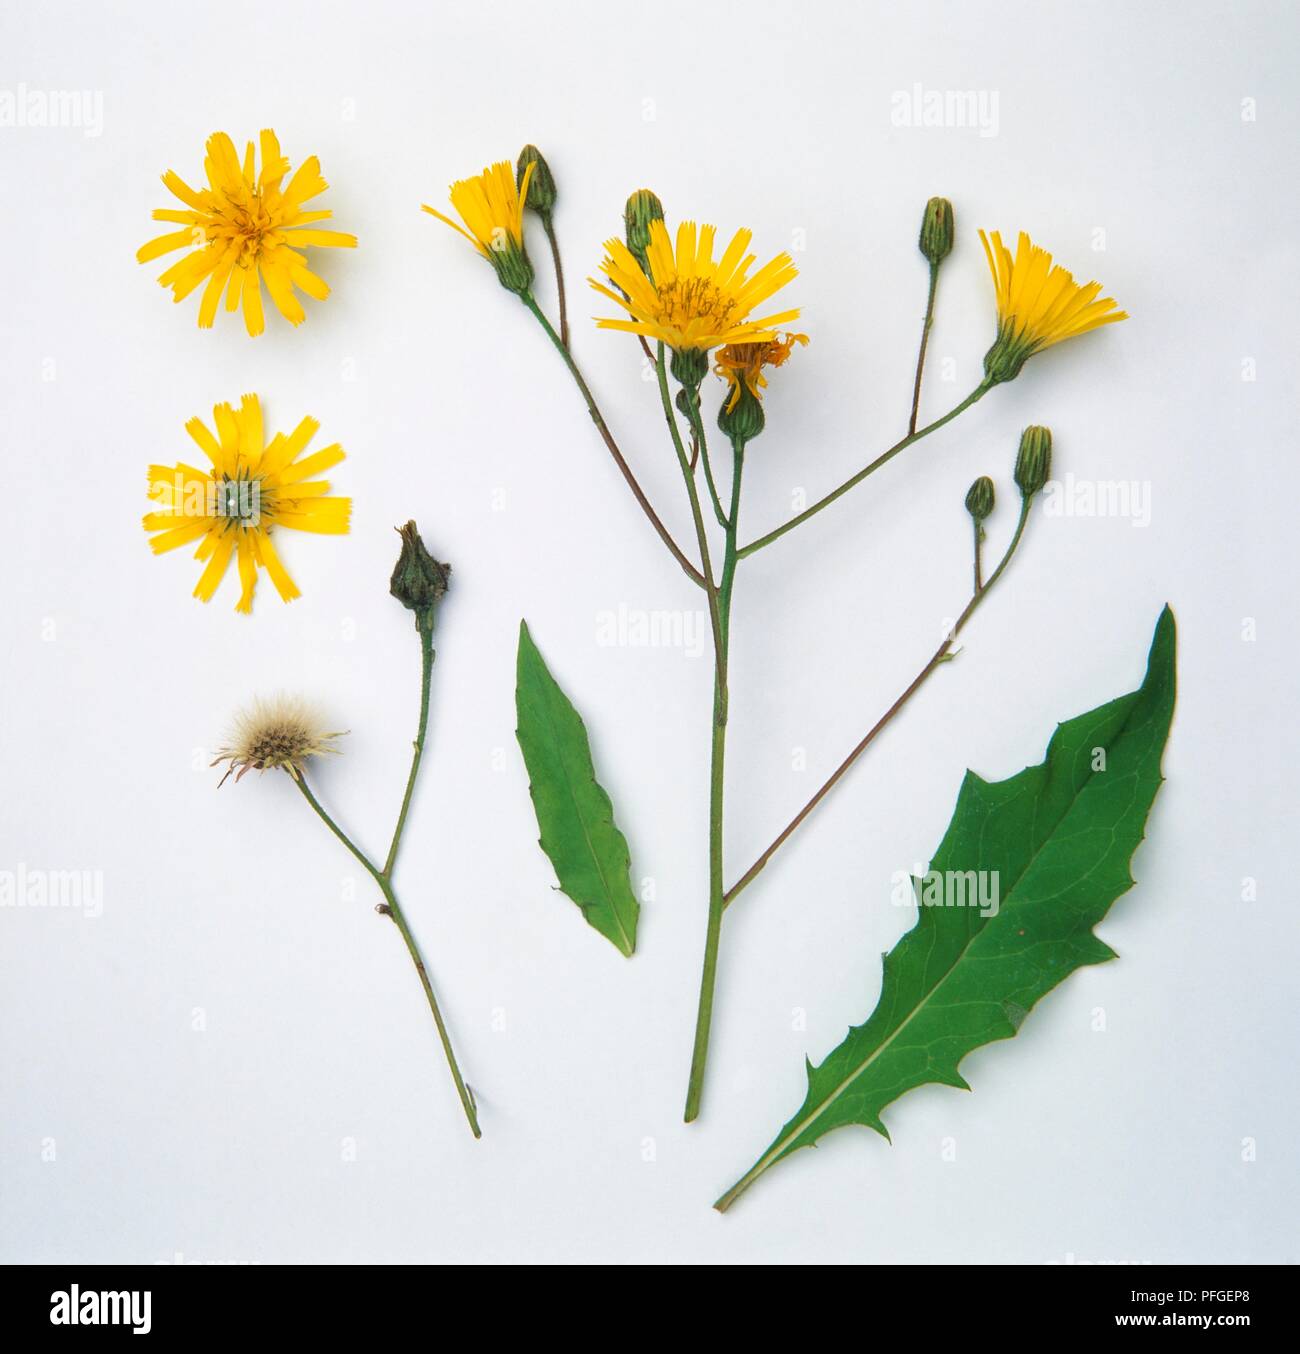 Hieracium vulgatum (Common hawkweed), branched stems with yellow flowers, flower bracts, pappus, and leaves Stock Photo